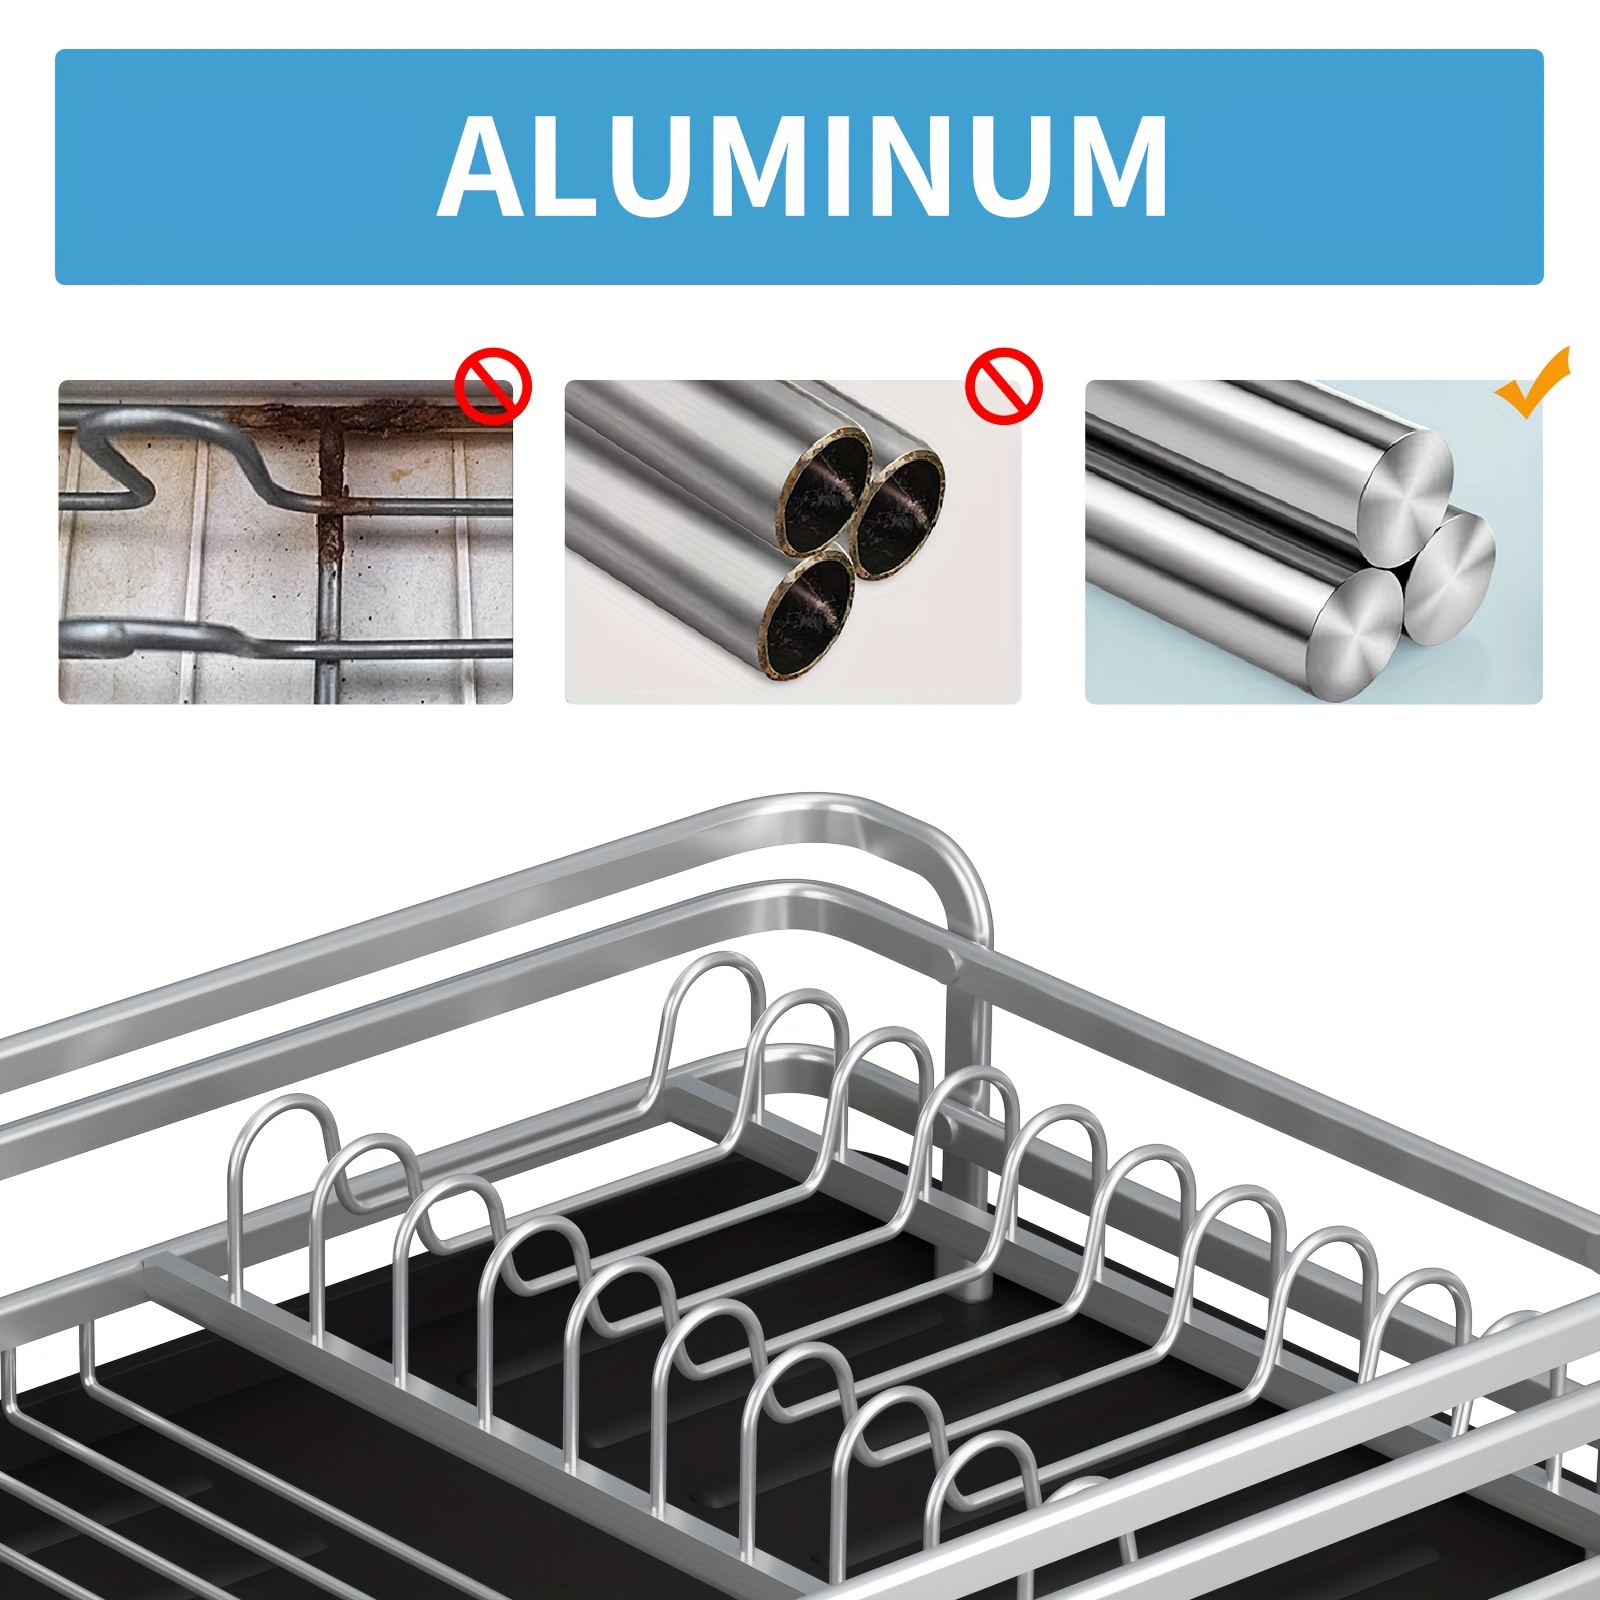 Aluminum Compact Rustproof Dish Drainer Dish Drying Rack with